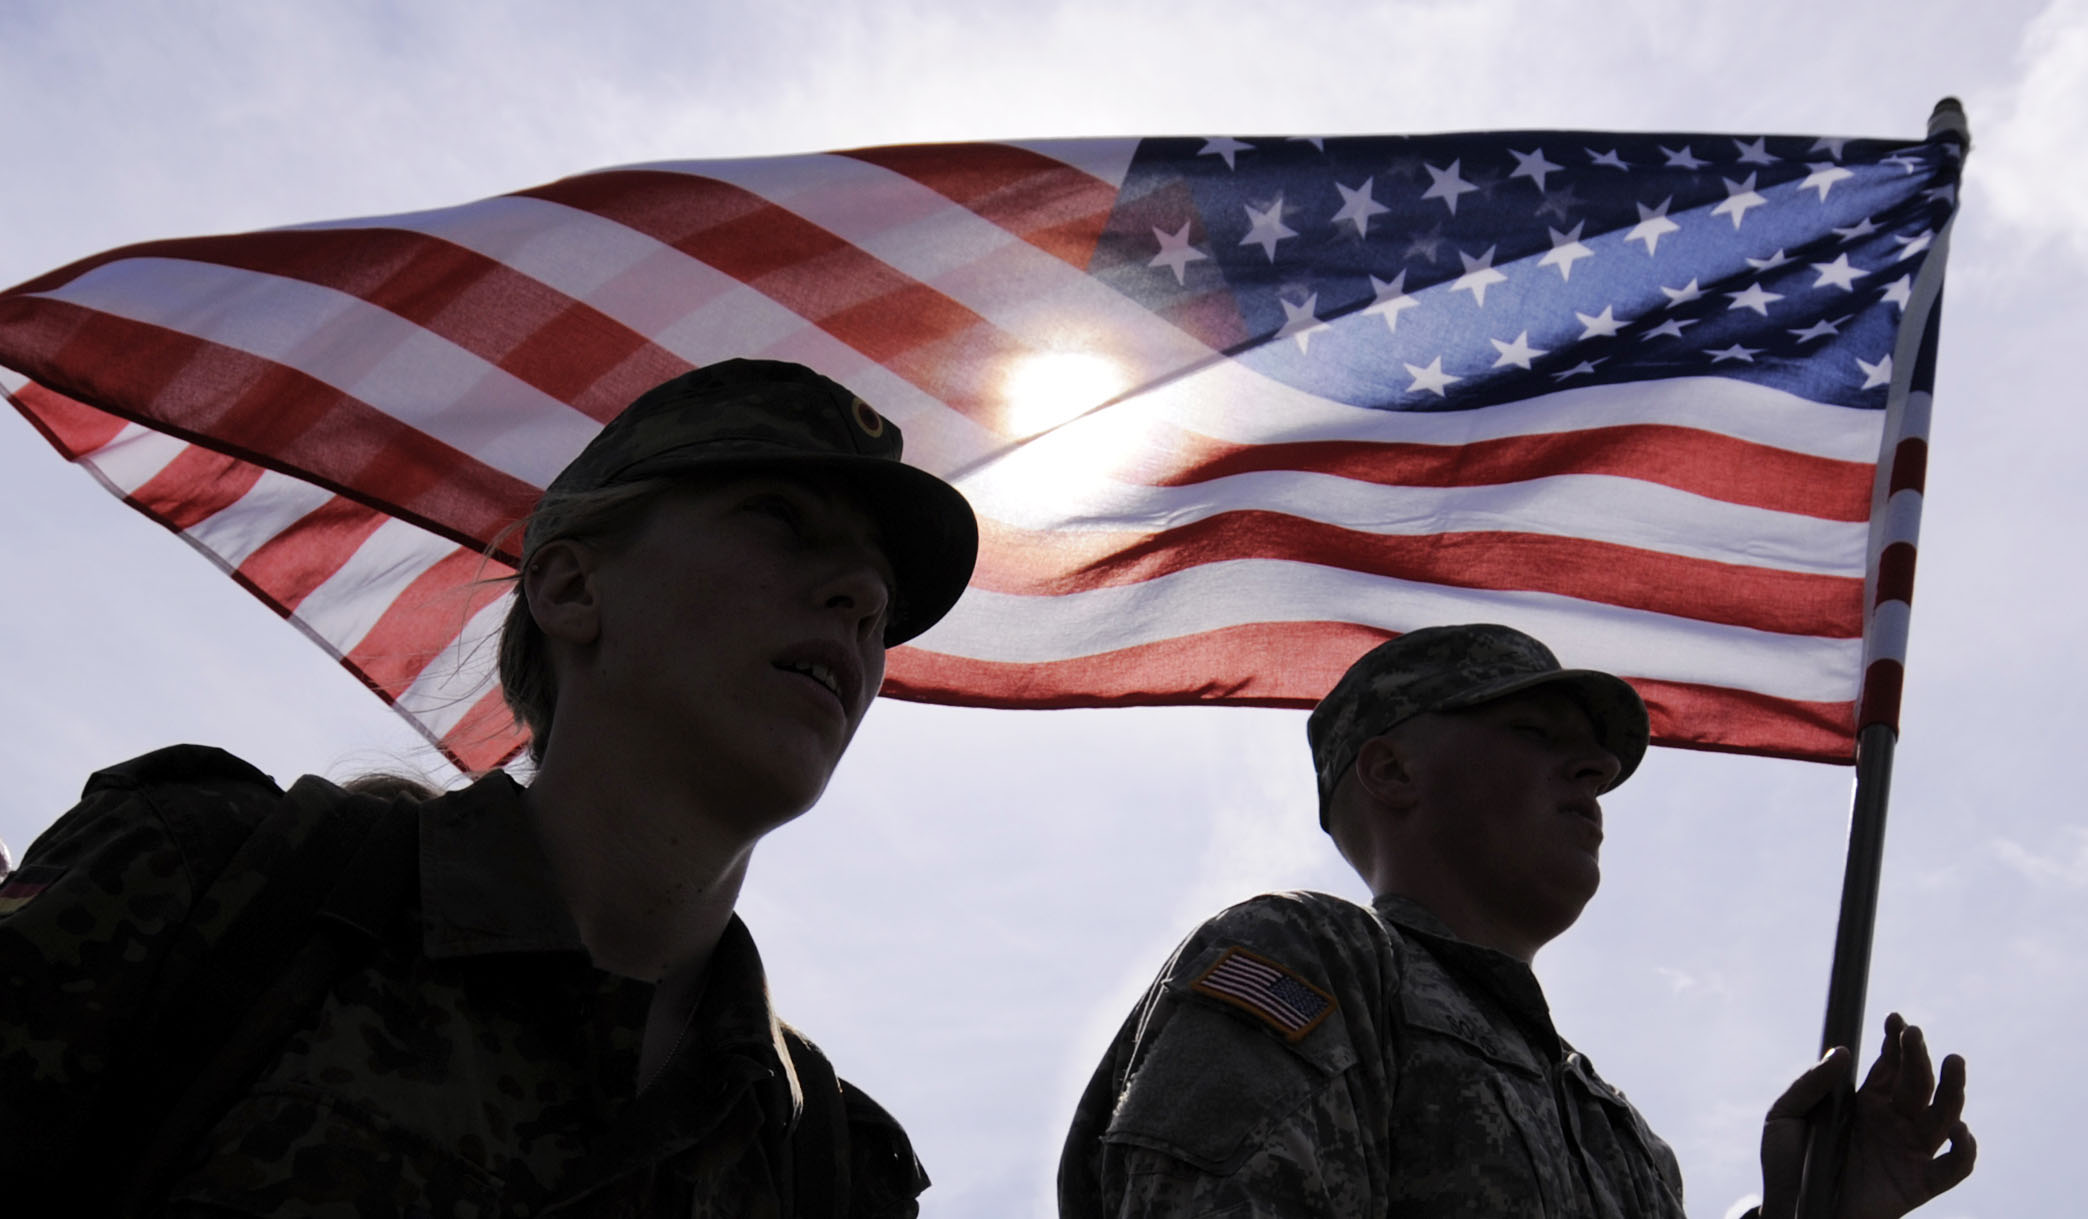 Sergeant Tanja Hoess of German Bundeswehr, left, and Privat Ian Soos of the U.S. Army, right, march with the U.S. flag during the Patrouille  Hlidka  Euregio  Egrensis (PHEE) 2011 International Military Exercise of soldiers from the Armed Forces of the Czech Republic, German Bundeswehr and US Army in Gera, central Germany, on Thursday, June 23, 2011. Some 50 professional soldiers and military reserves will be divided into mixed international teams to fulfil several tasks. (AP Photo/Jens Meyer)